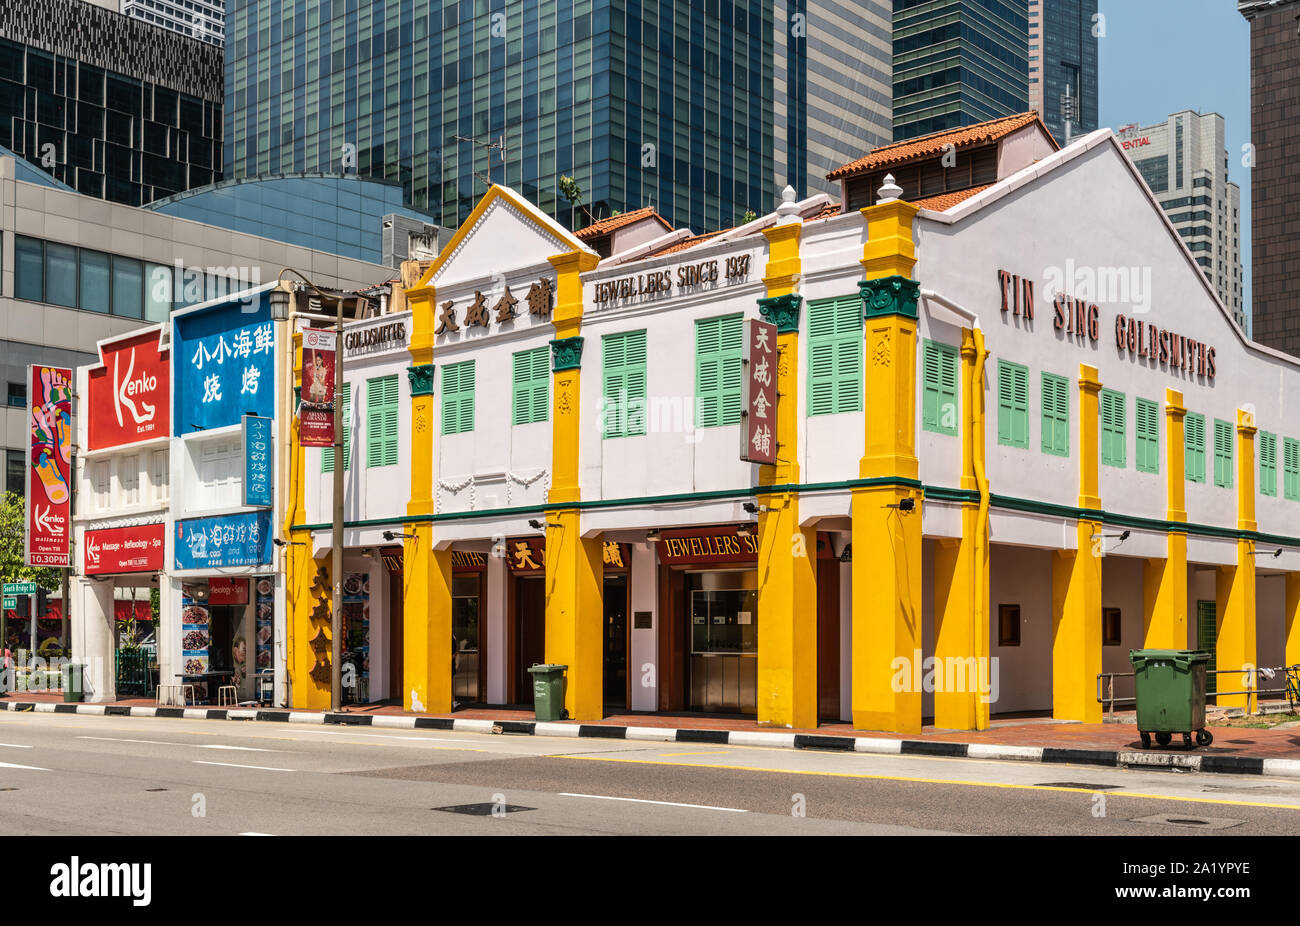 Singapore - March 22, 2019: Chinatown. Yin Sing Goldsmiths and Jewellers on South Bridge Road is large white and yellow corner building. Skyscrapers b Stock Photo